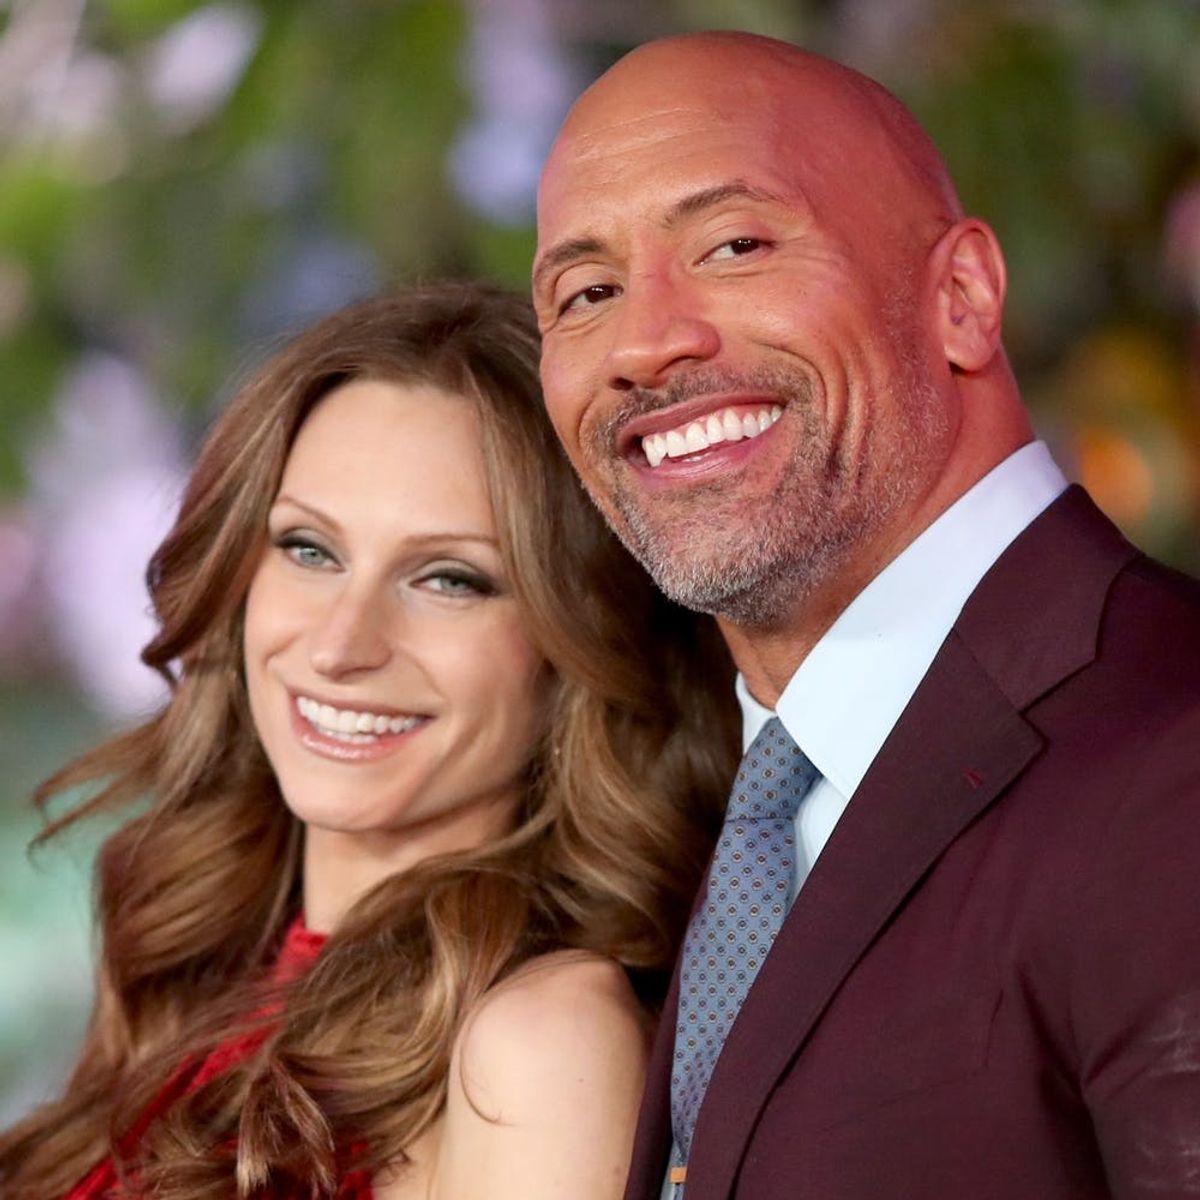 Dwayne ‘The Rock’ Johnson and Lauren Hashian Are Expecting Their Second Child!